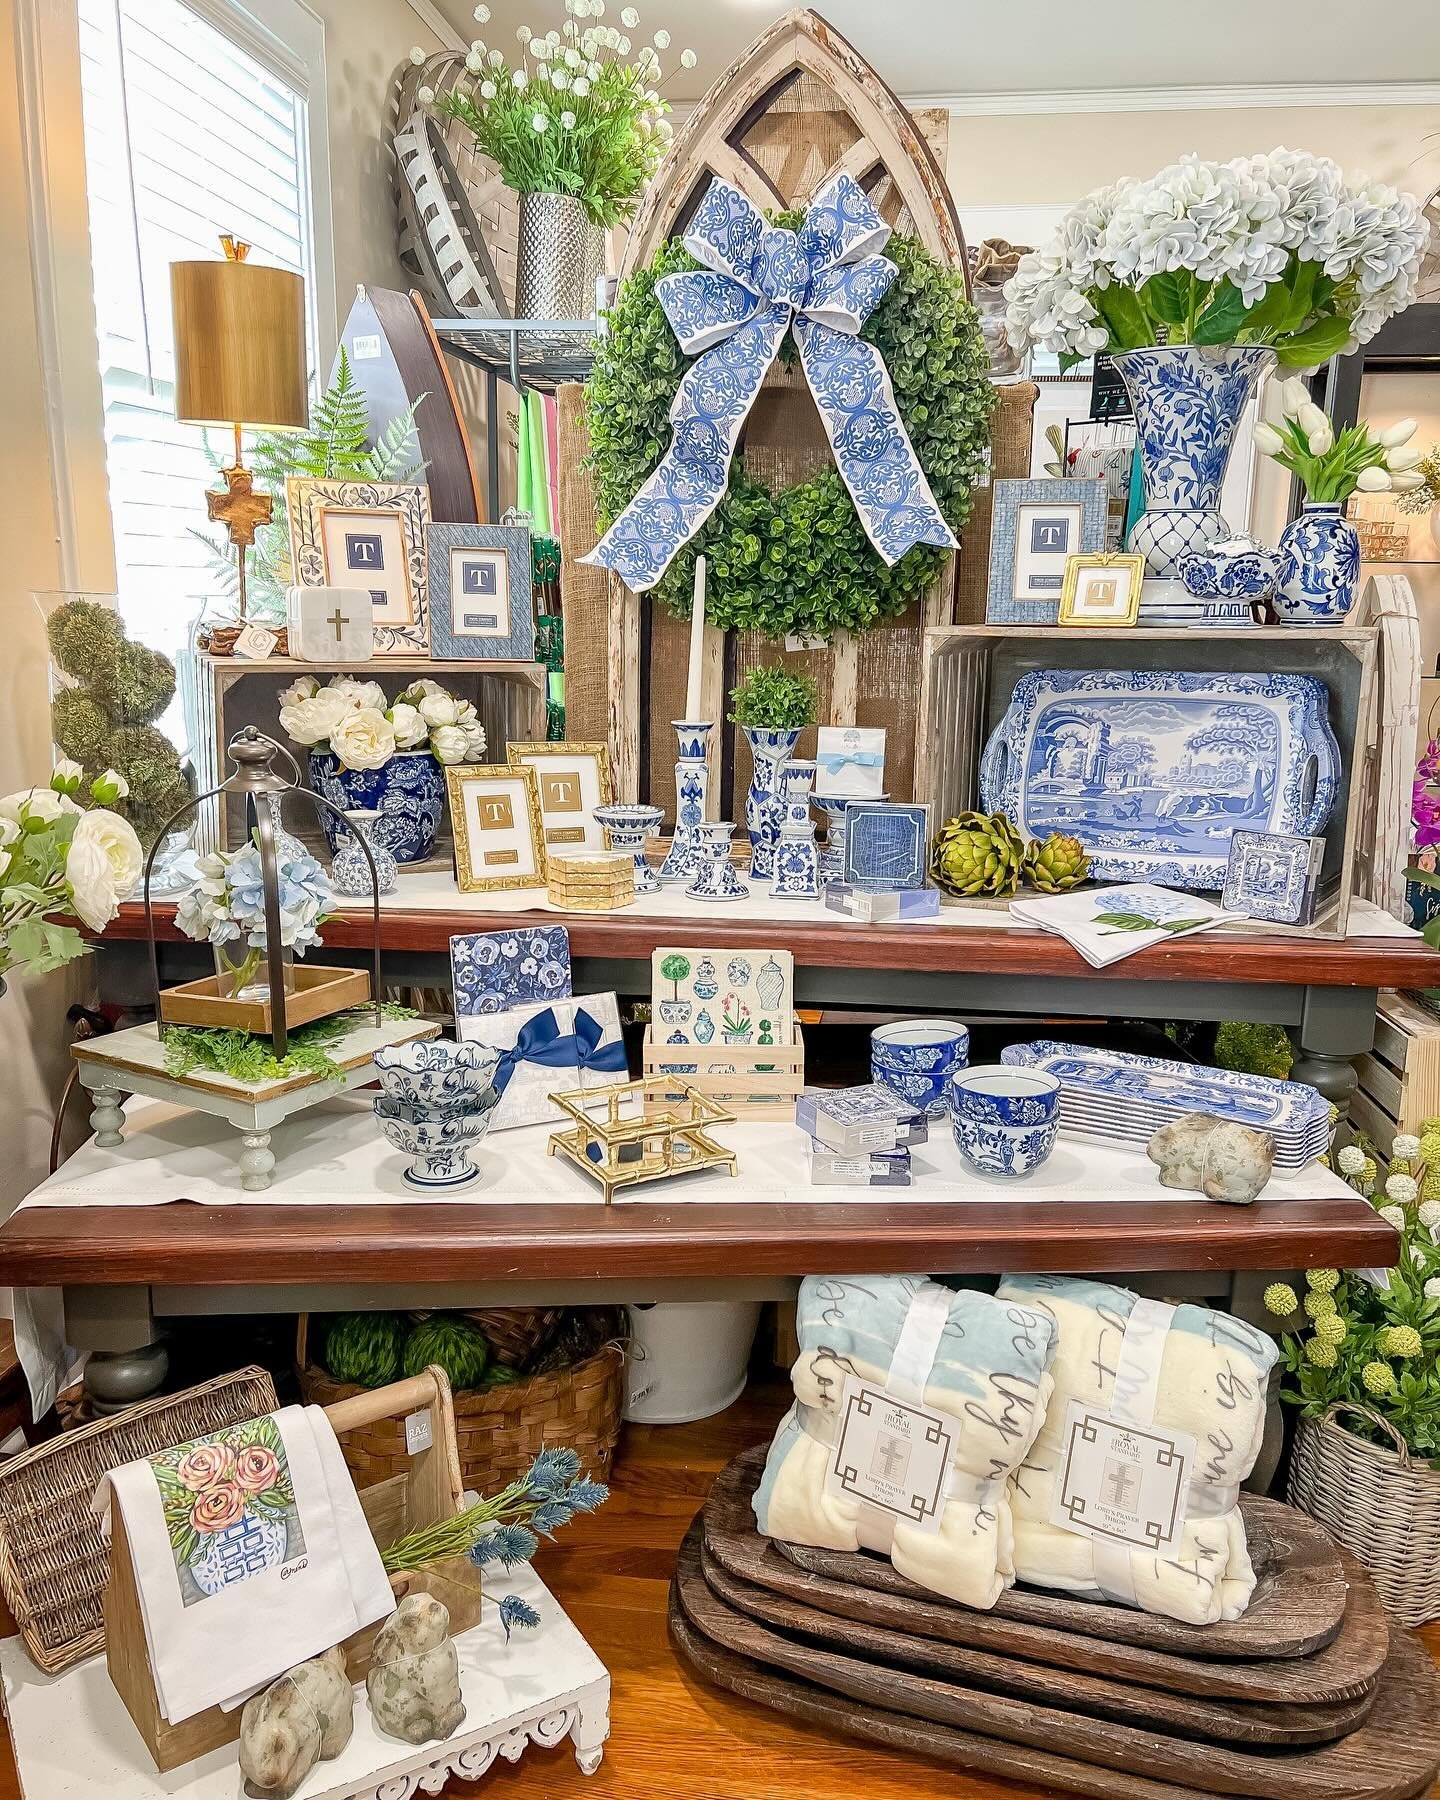 No need for the weekend blues!! 💙🤍 Come shop!! 🛍️✨ Mother&rsquo;s Day is in 2 weeks!! 𝙊𝙥𝙚𝙣 until 𝟲𝙥𝙢 today!⁣
⁣
Carmen&rsquo;s on Carolina⁣
1631 Carolina Avenue⁣
Orangeburg, SC⁣
⁣
⁣